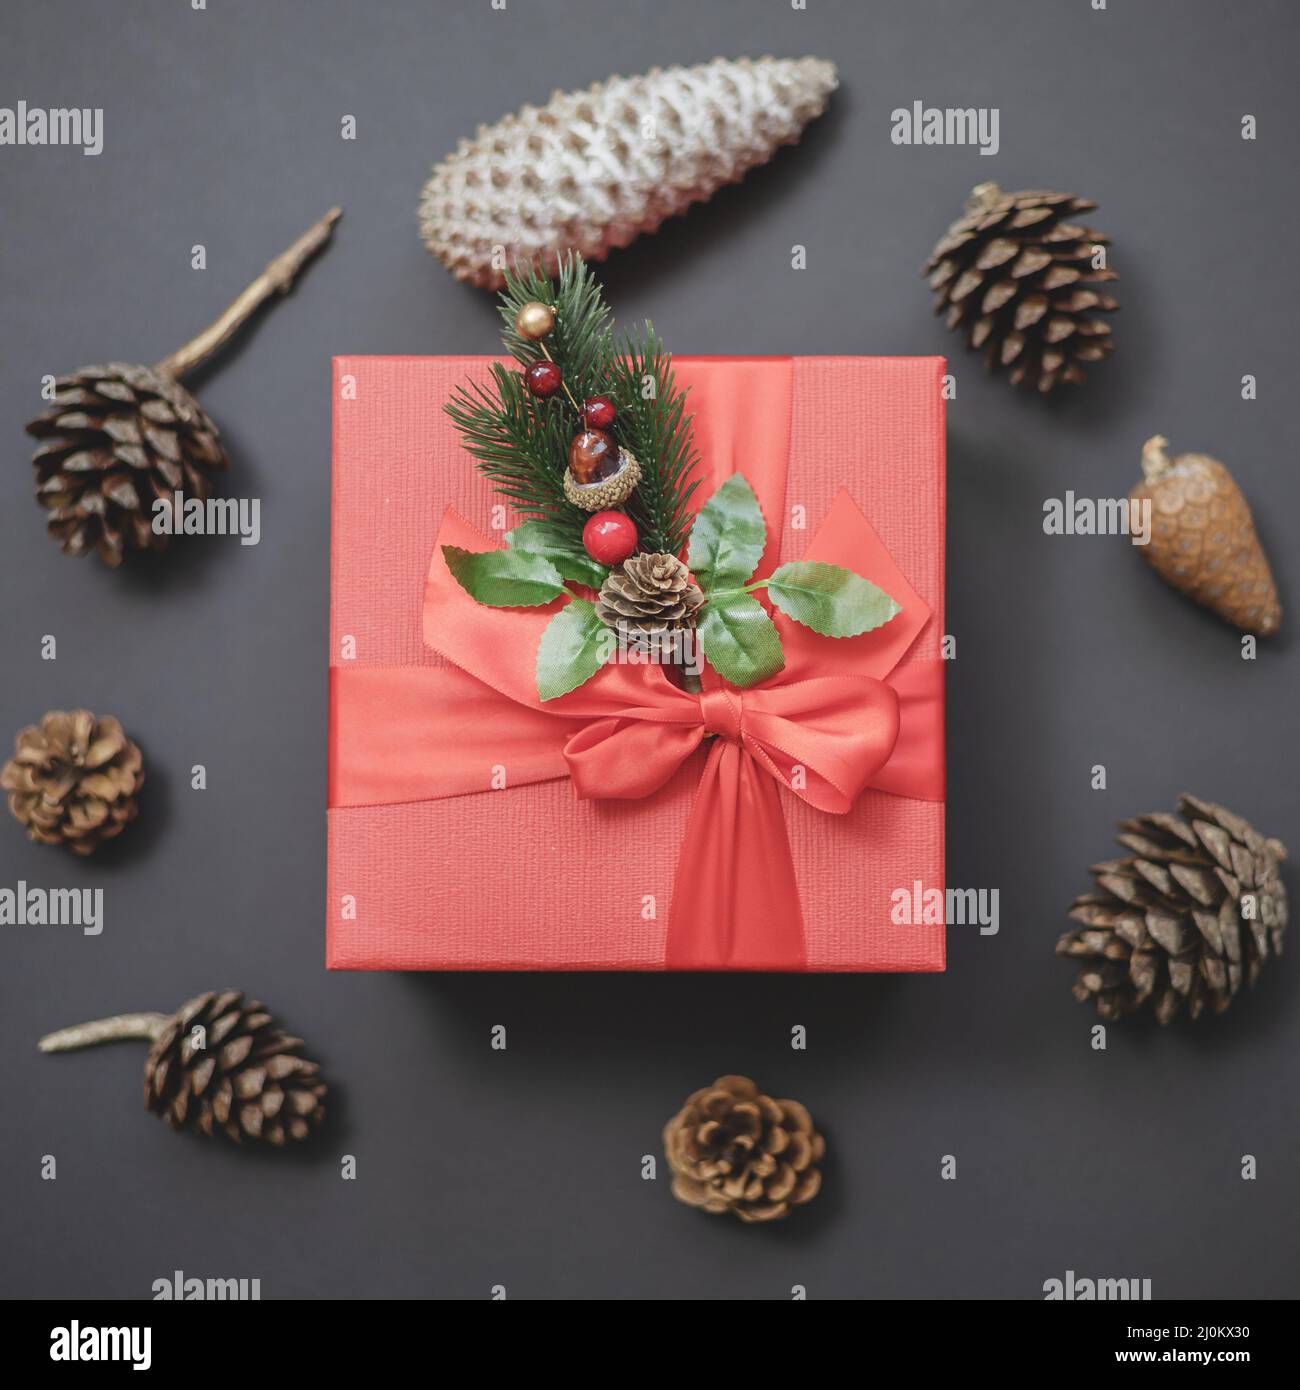 A red square gift box decorated with a coniferous twig lies among fir and pine cones on a dark background. Christmas composition Stock Photo